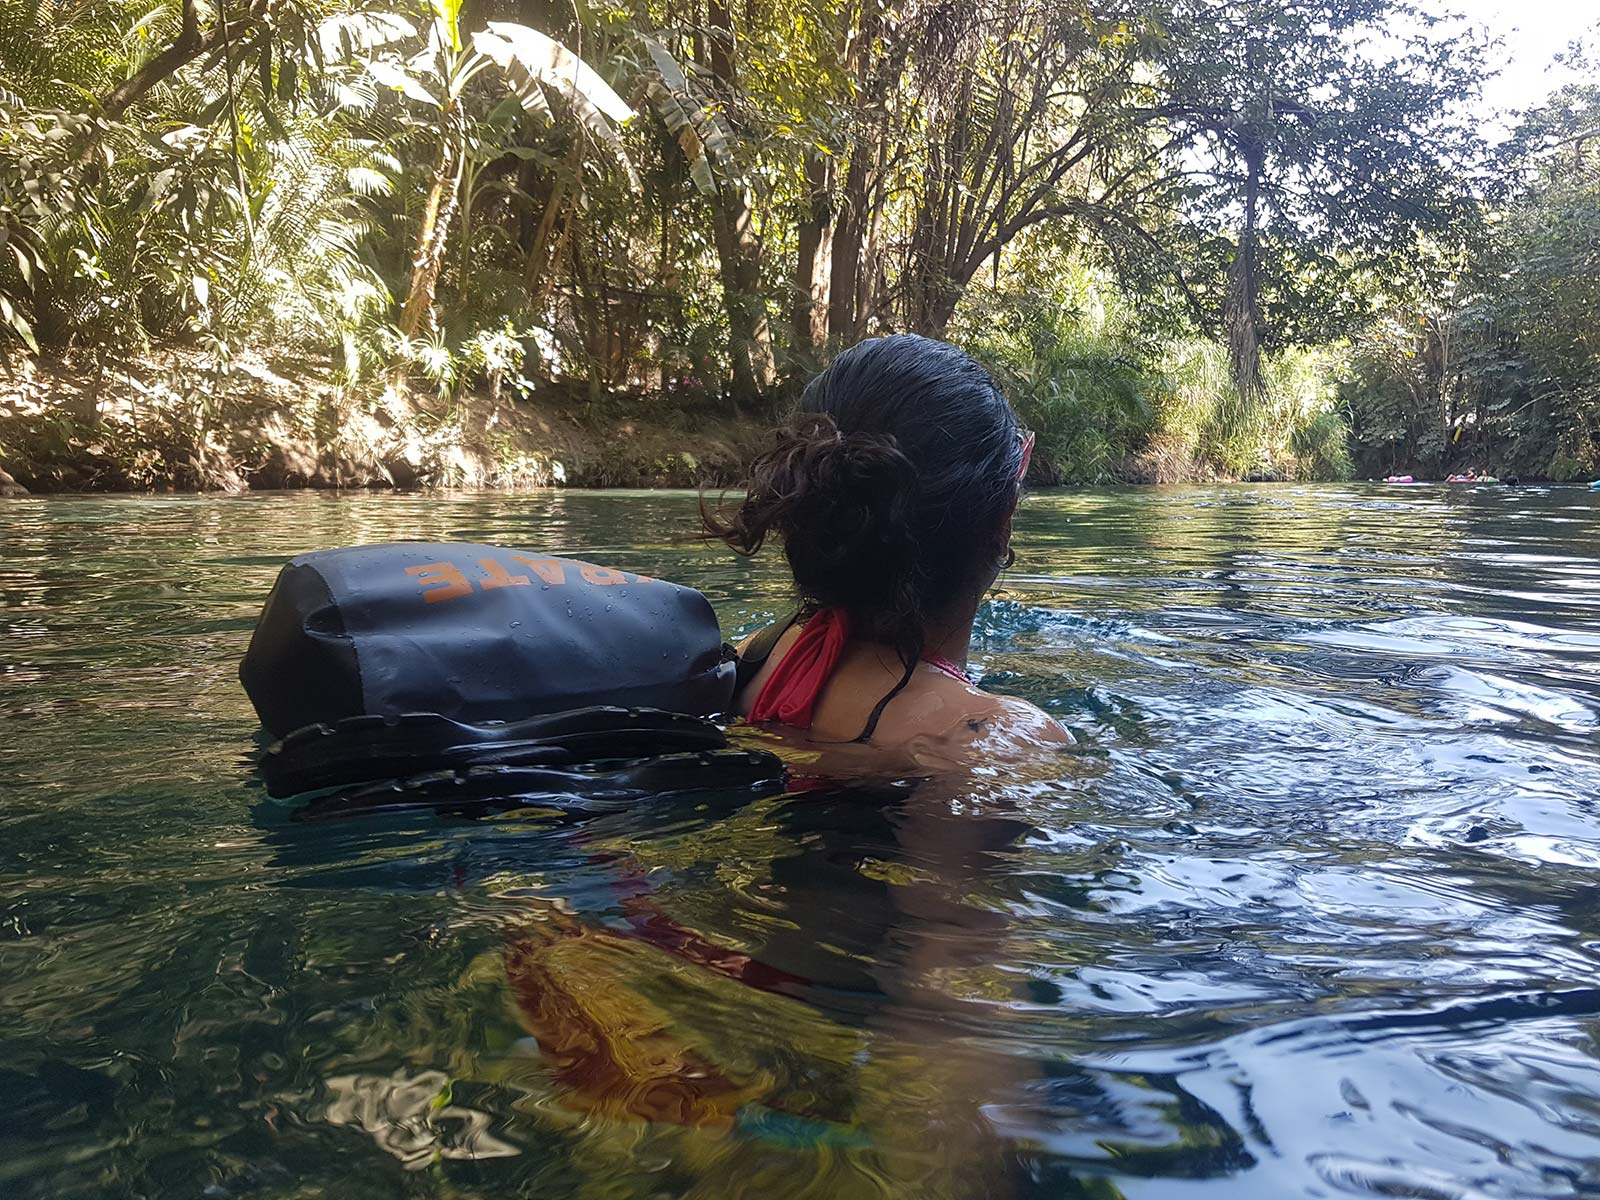 DryBag in the water